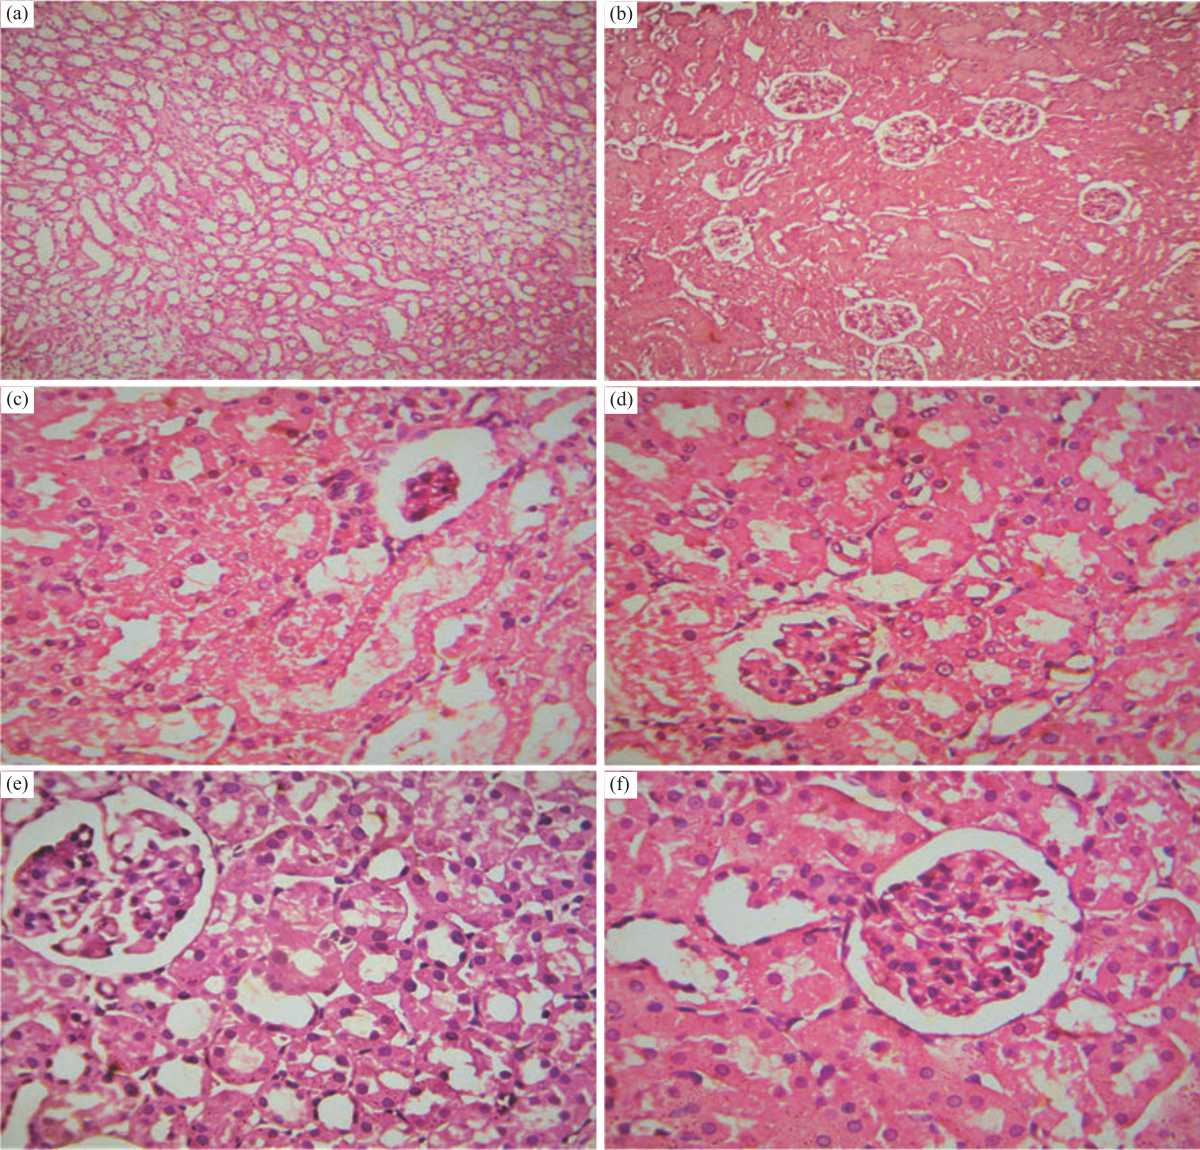 Image for - Nephroprotective Effect of Costus (Saussurea costus) Ethanolic Extract on Oxaliplatin®-induced Nephrotoxicity in Adult Male Wistar Rats